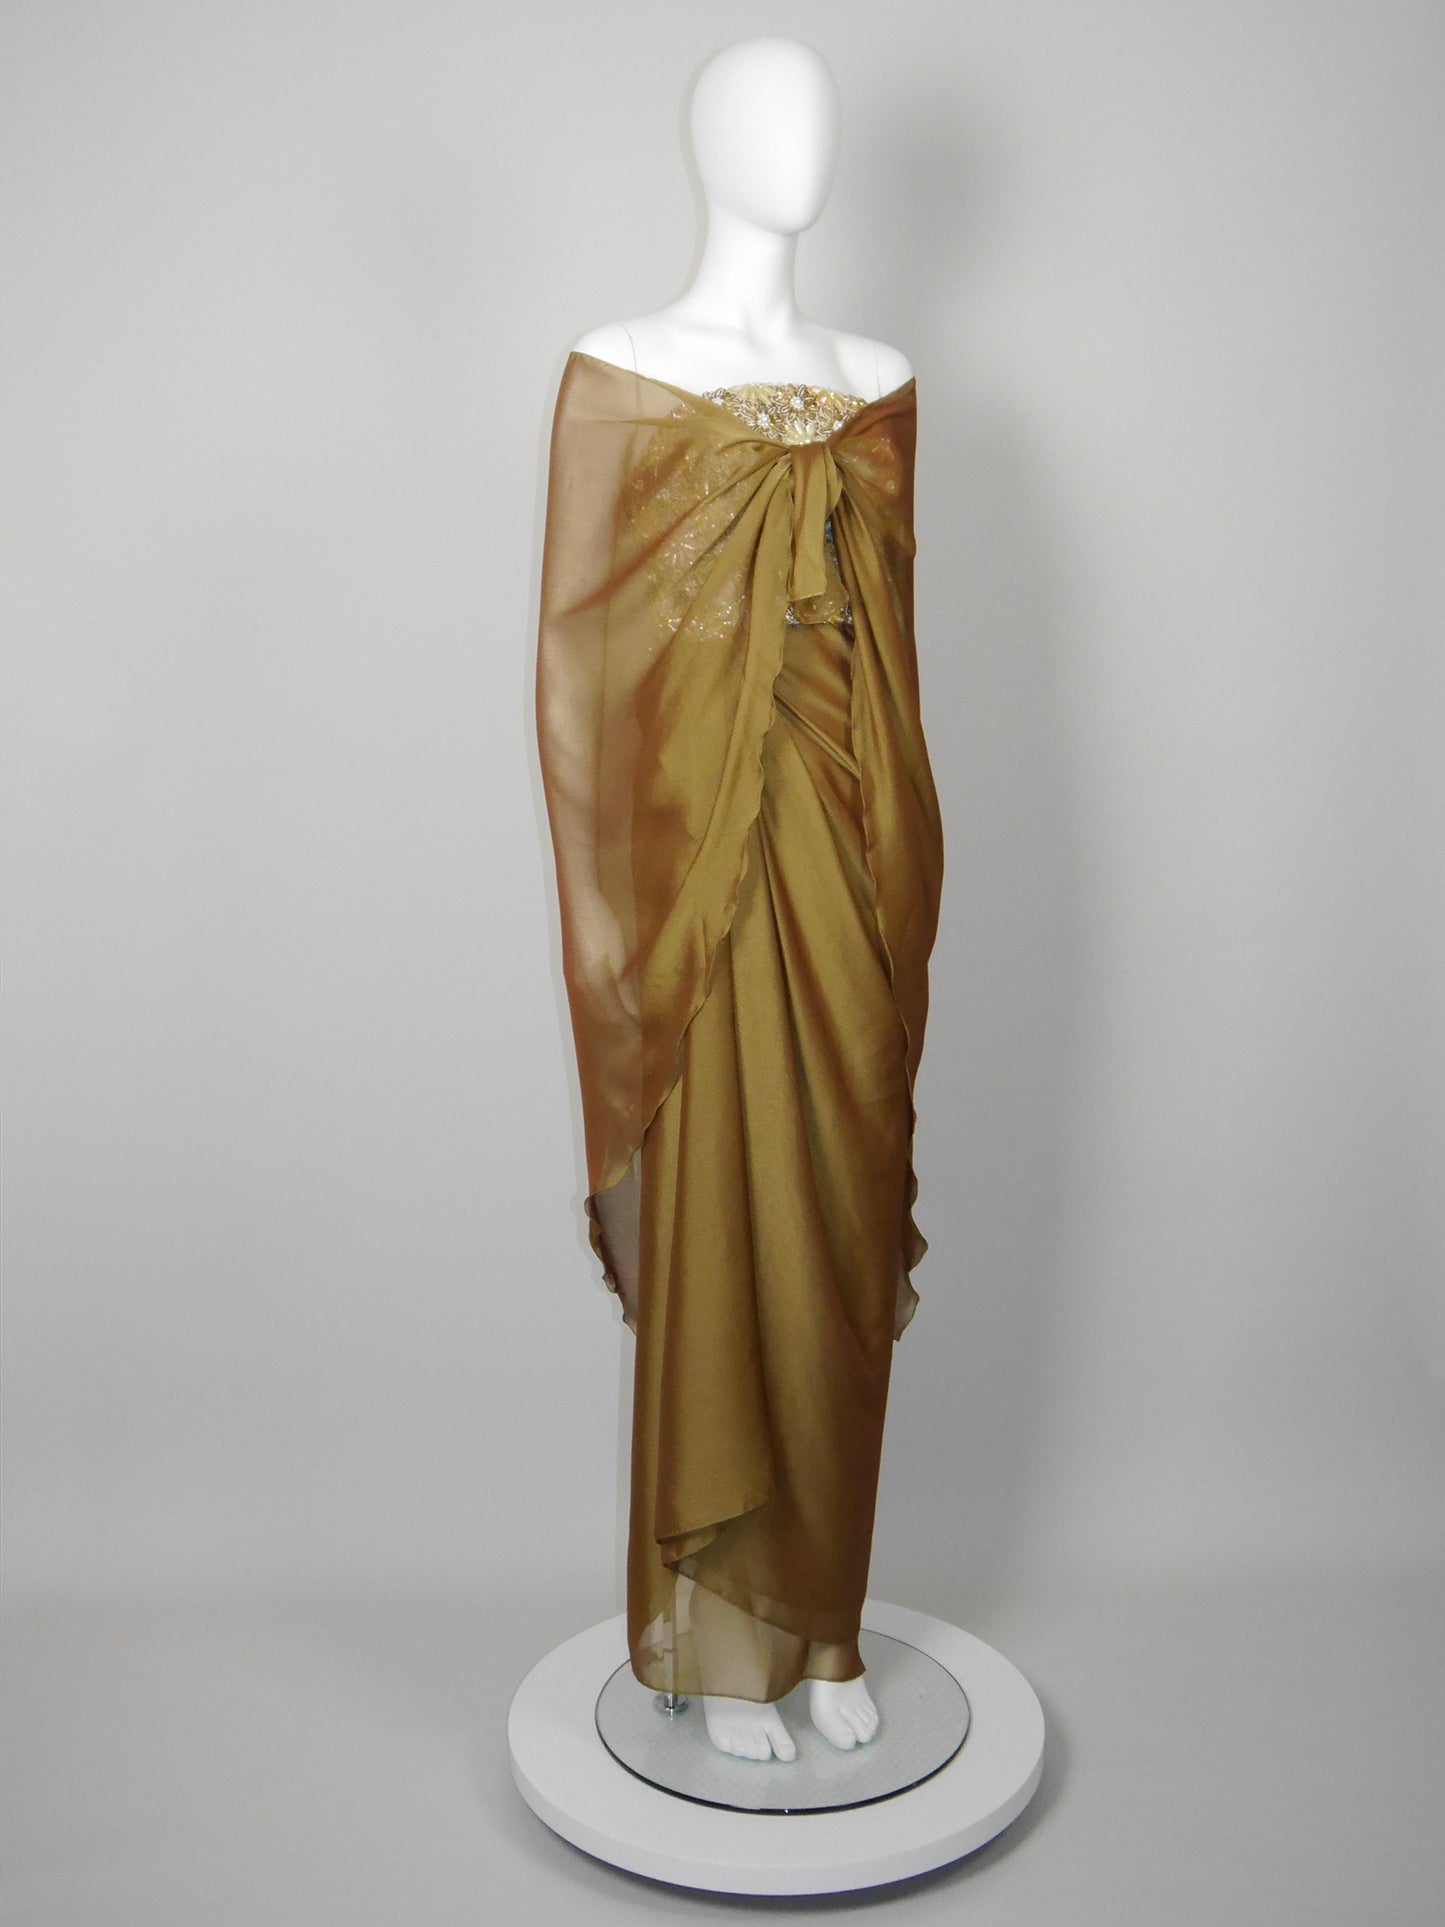 NINA RICCI 1990s Vintage Heavily Beaded Copper Gold Strapless Evening Gown w/ Stole